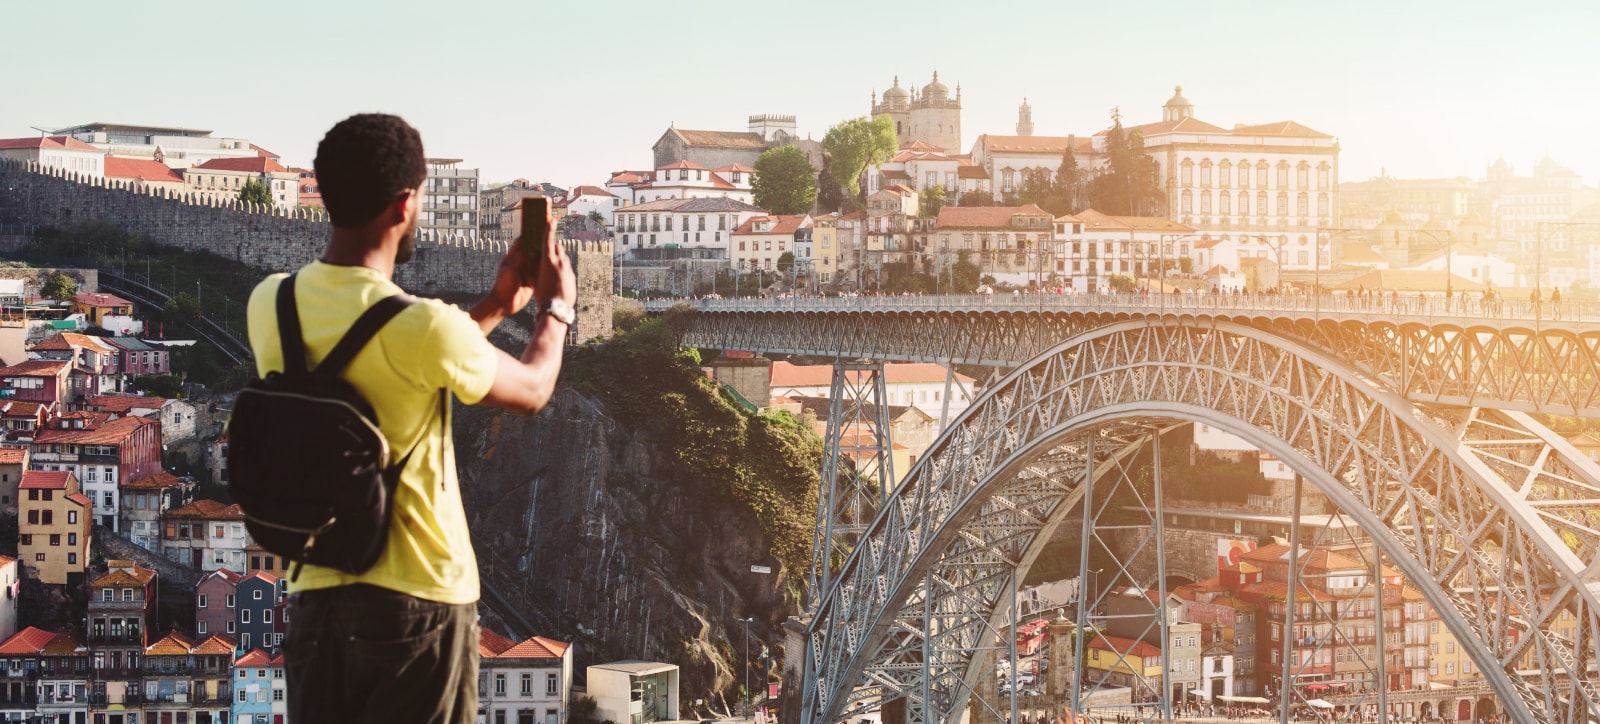 Work and Live in Douro: An Idyllic Destination for Professionals